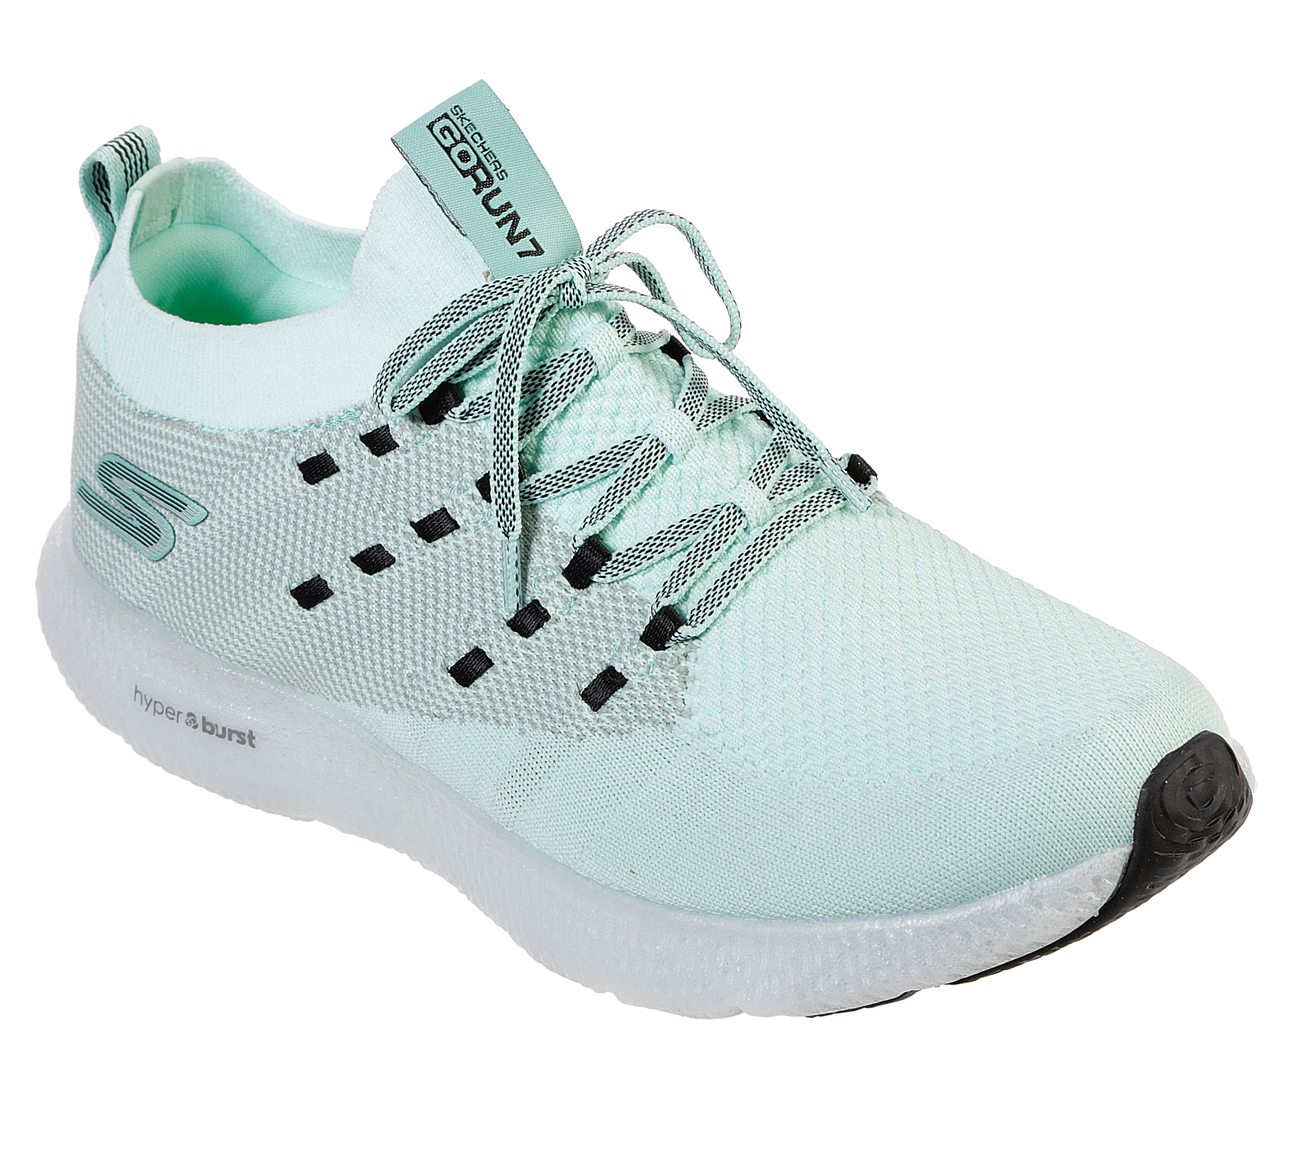 GO RUN 7 -, TURQUOISE/BLACK Footwear Lateral View